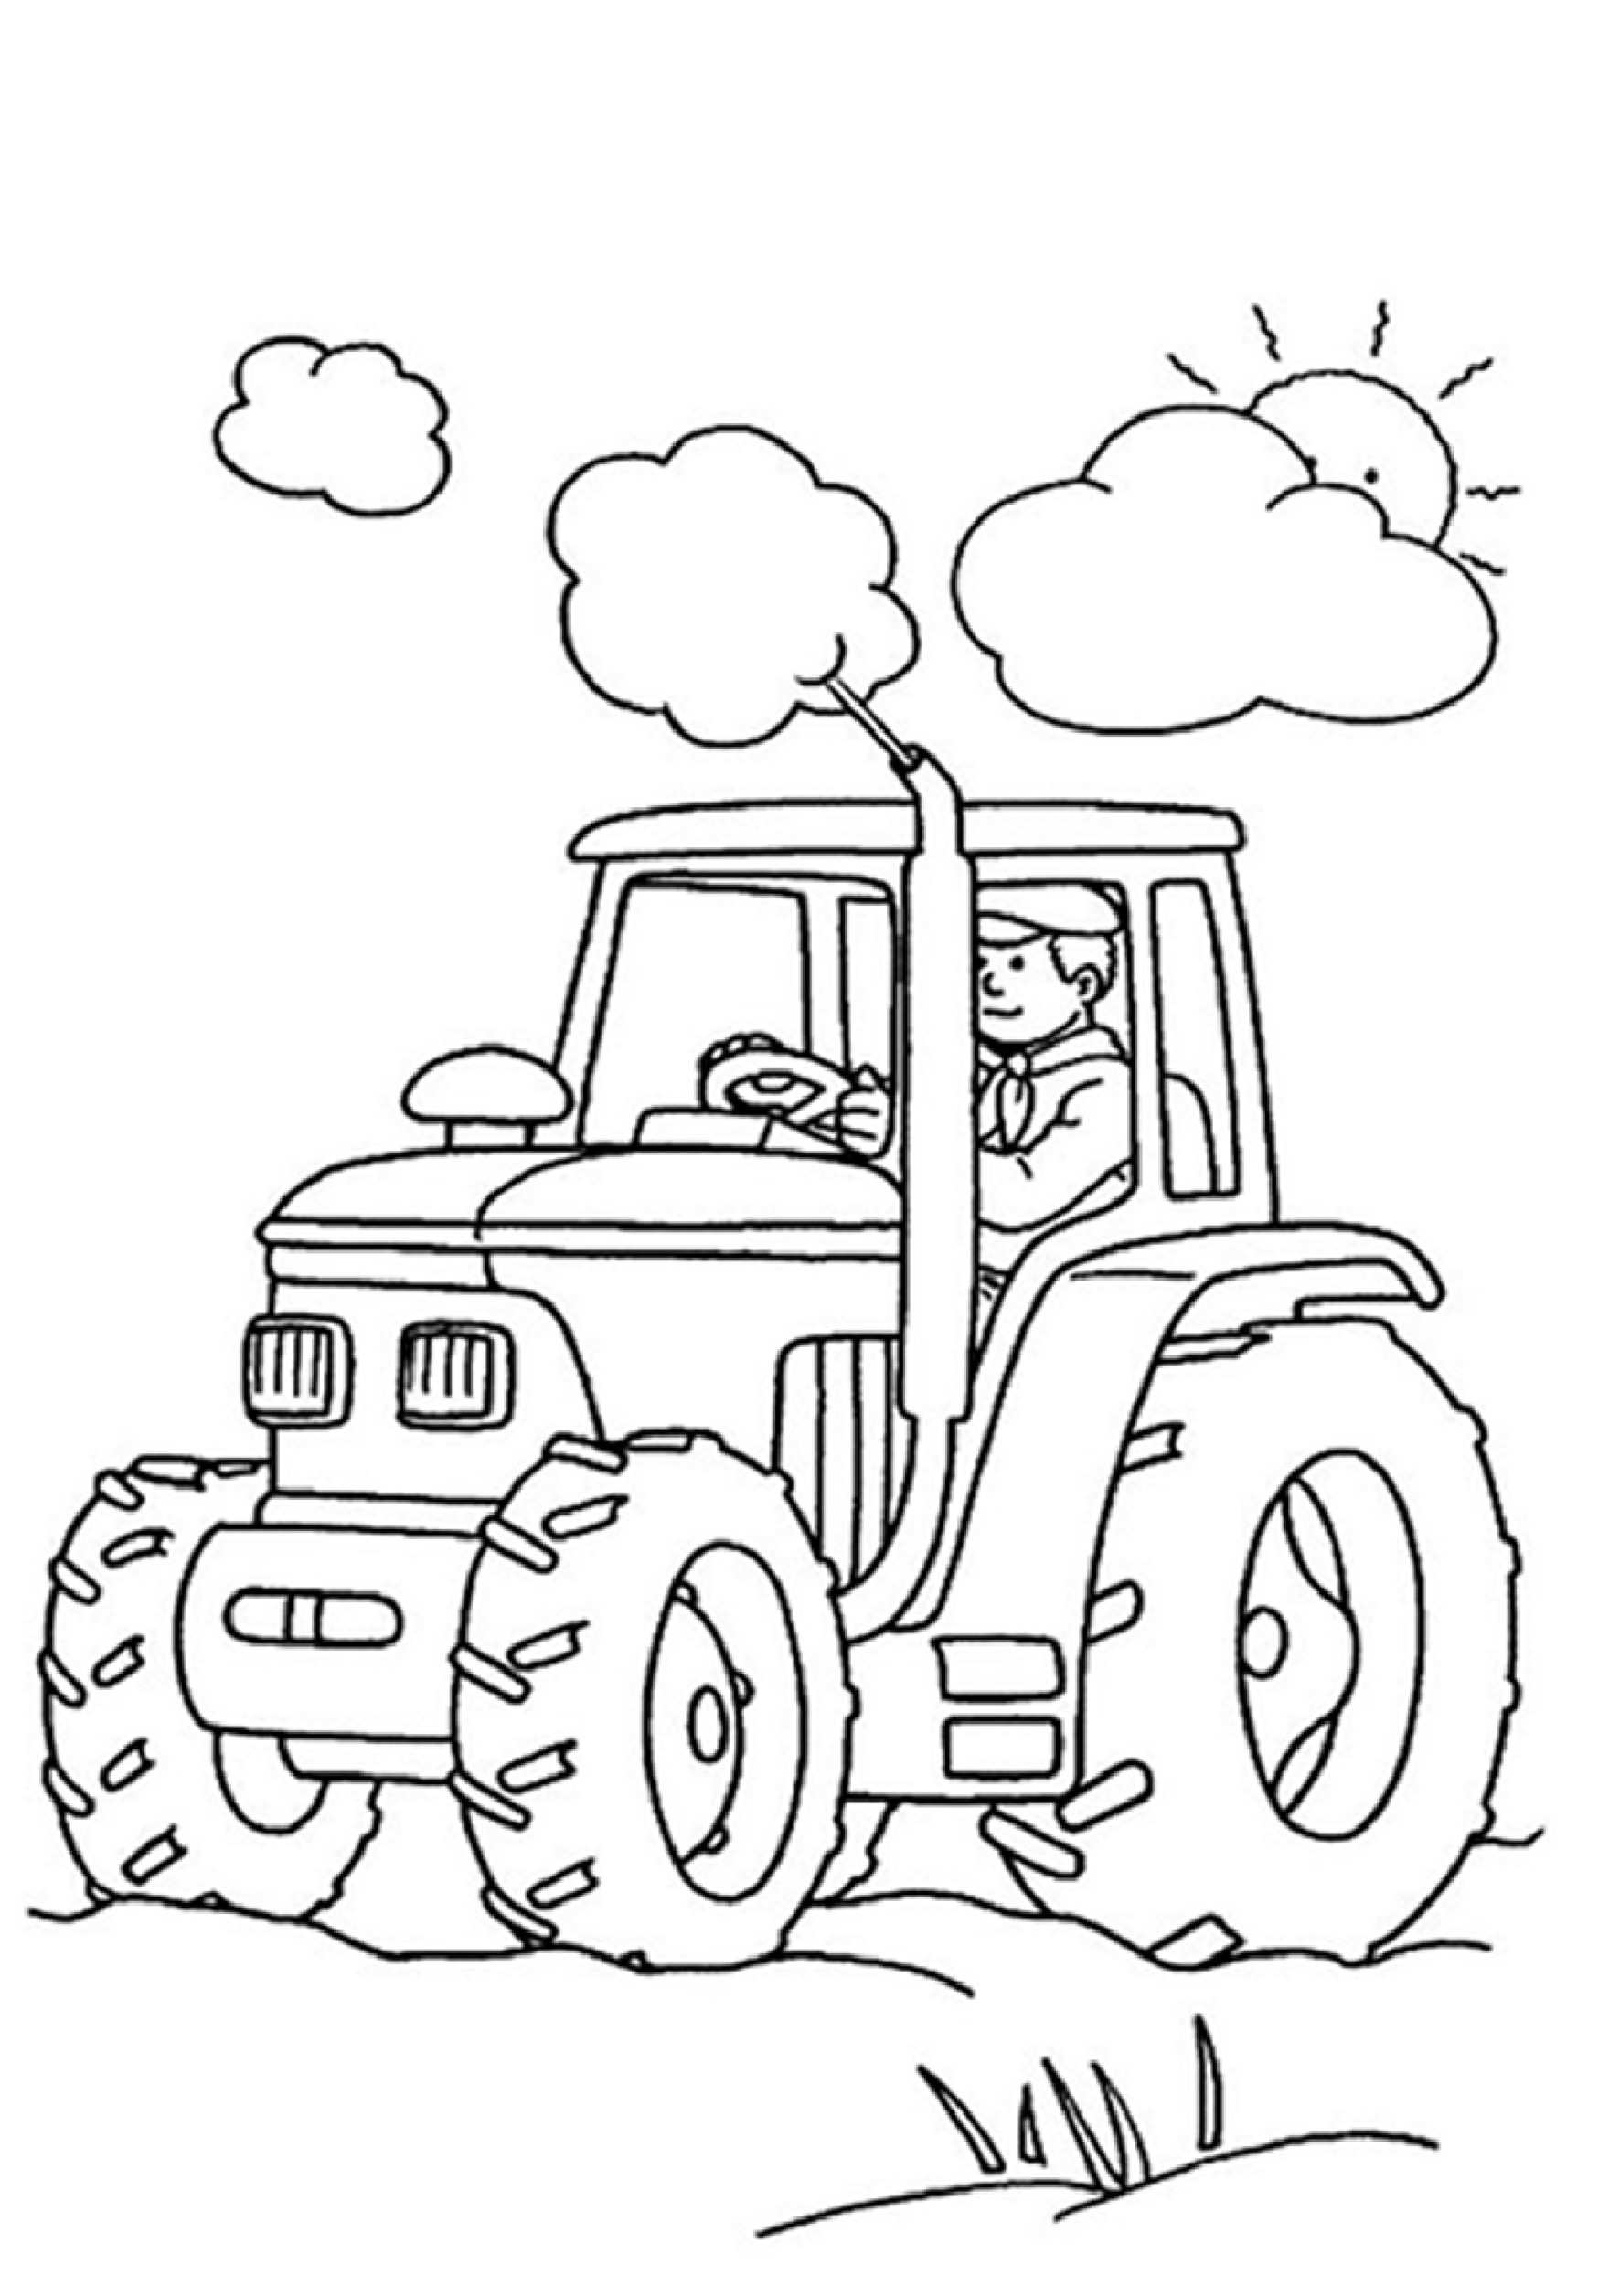 30 Of the Best Ideas for Coloring Pages Kidsboys.com - Home, Family ...